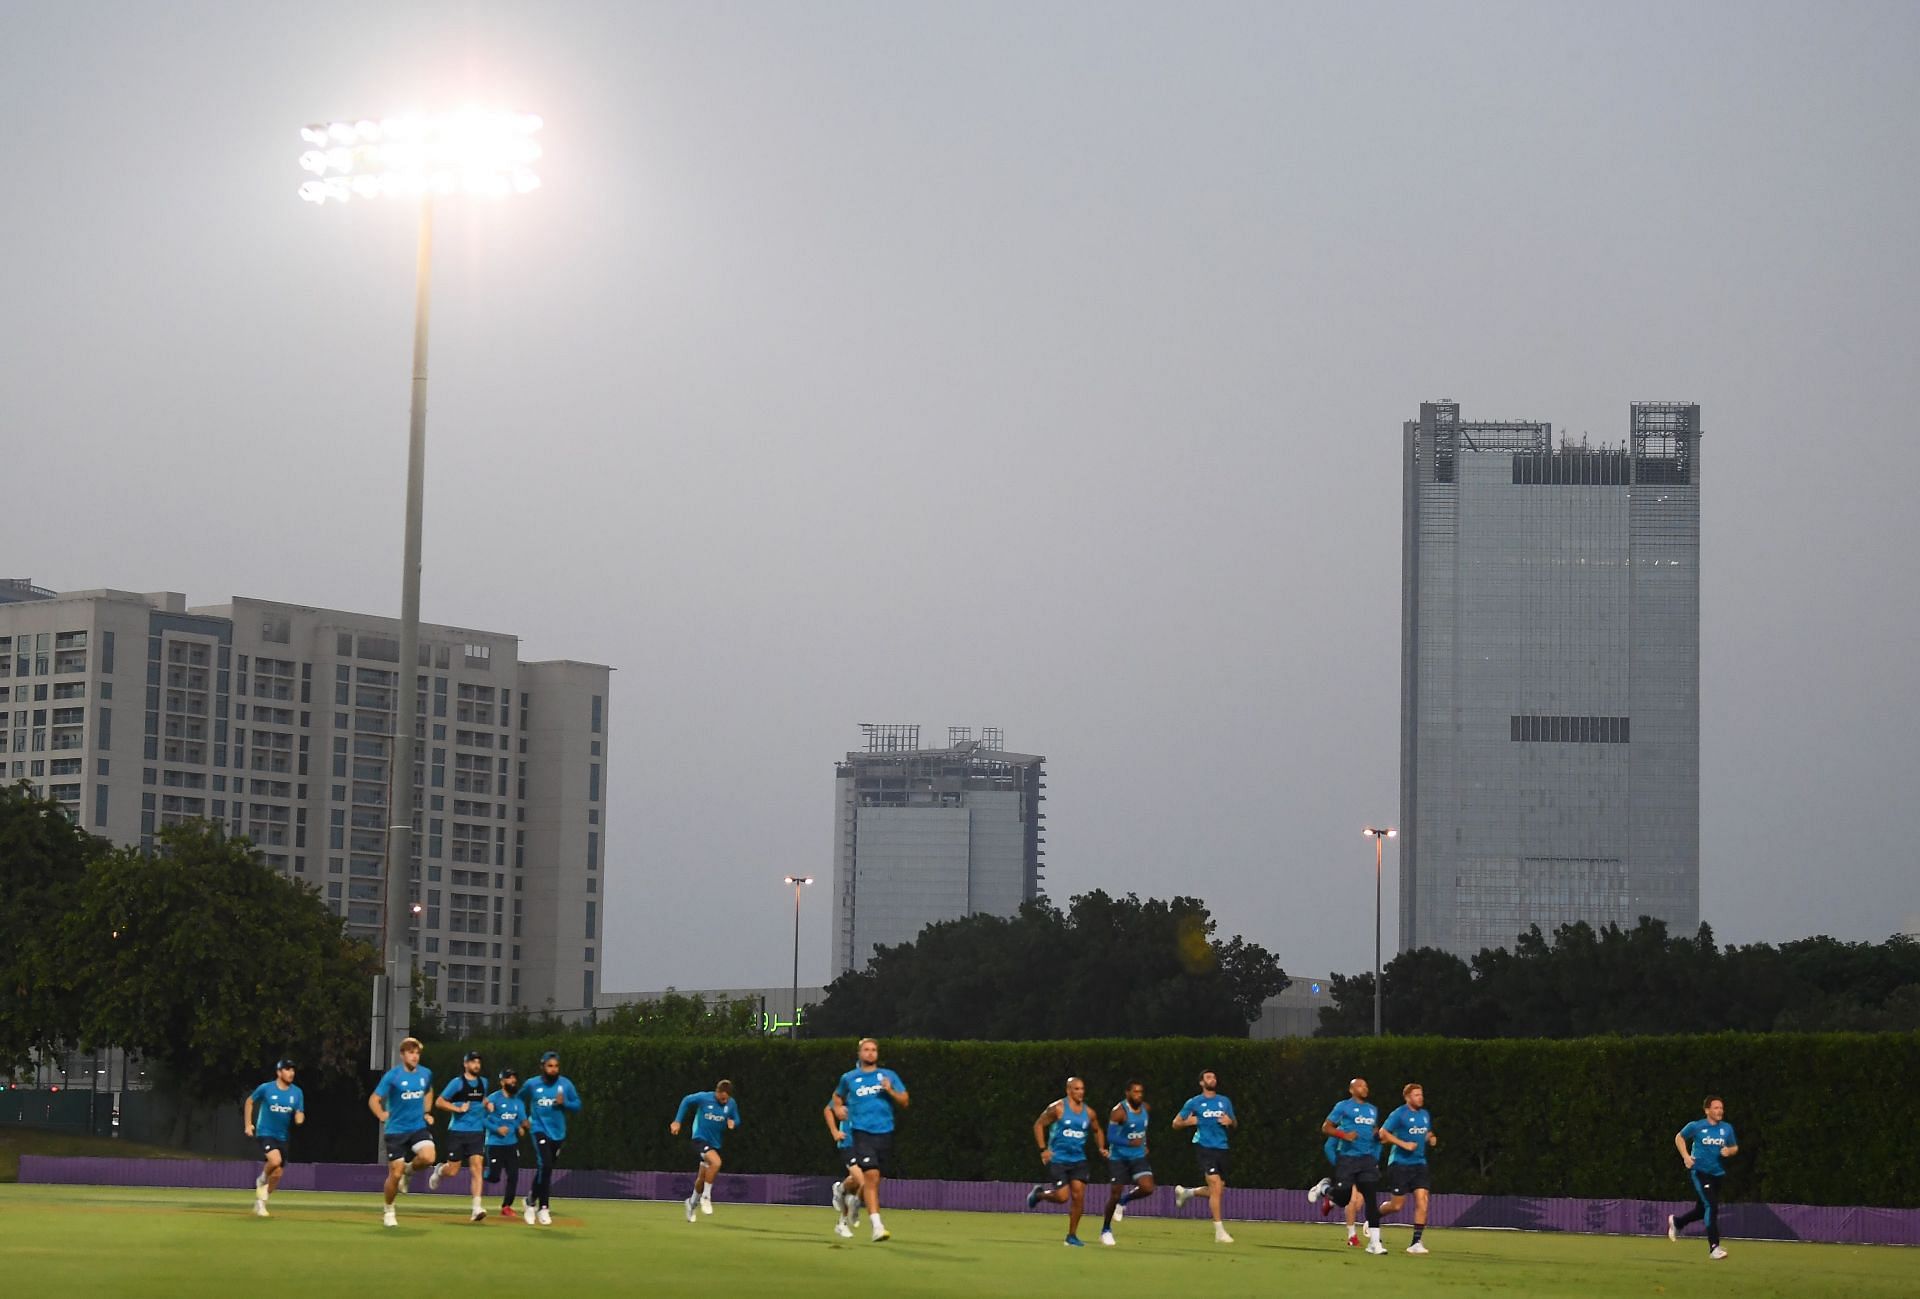 The ICC Academy in Dubai will host this clash between UAE and Oman